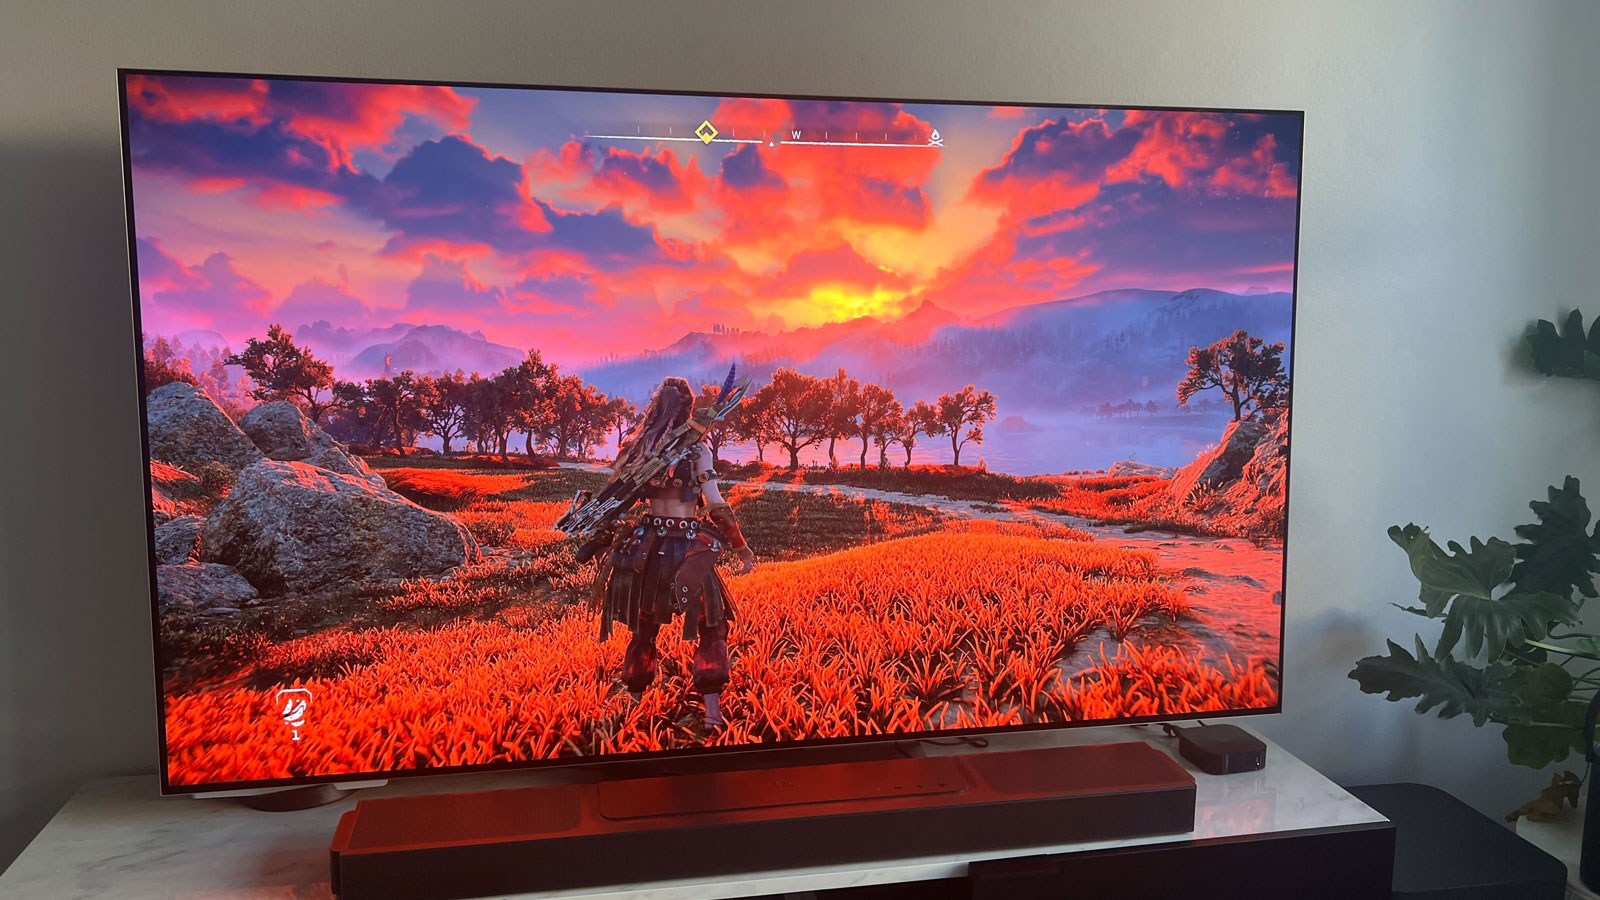 LG's new G3 OLED TV apparently uses Micro Lens Array tech to hit a